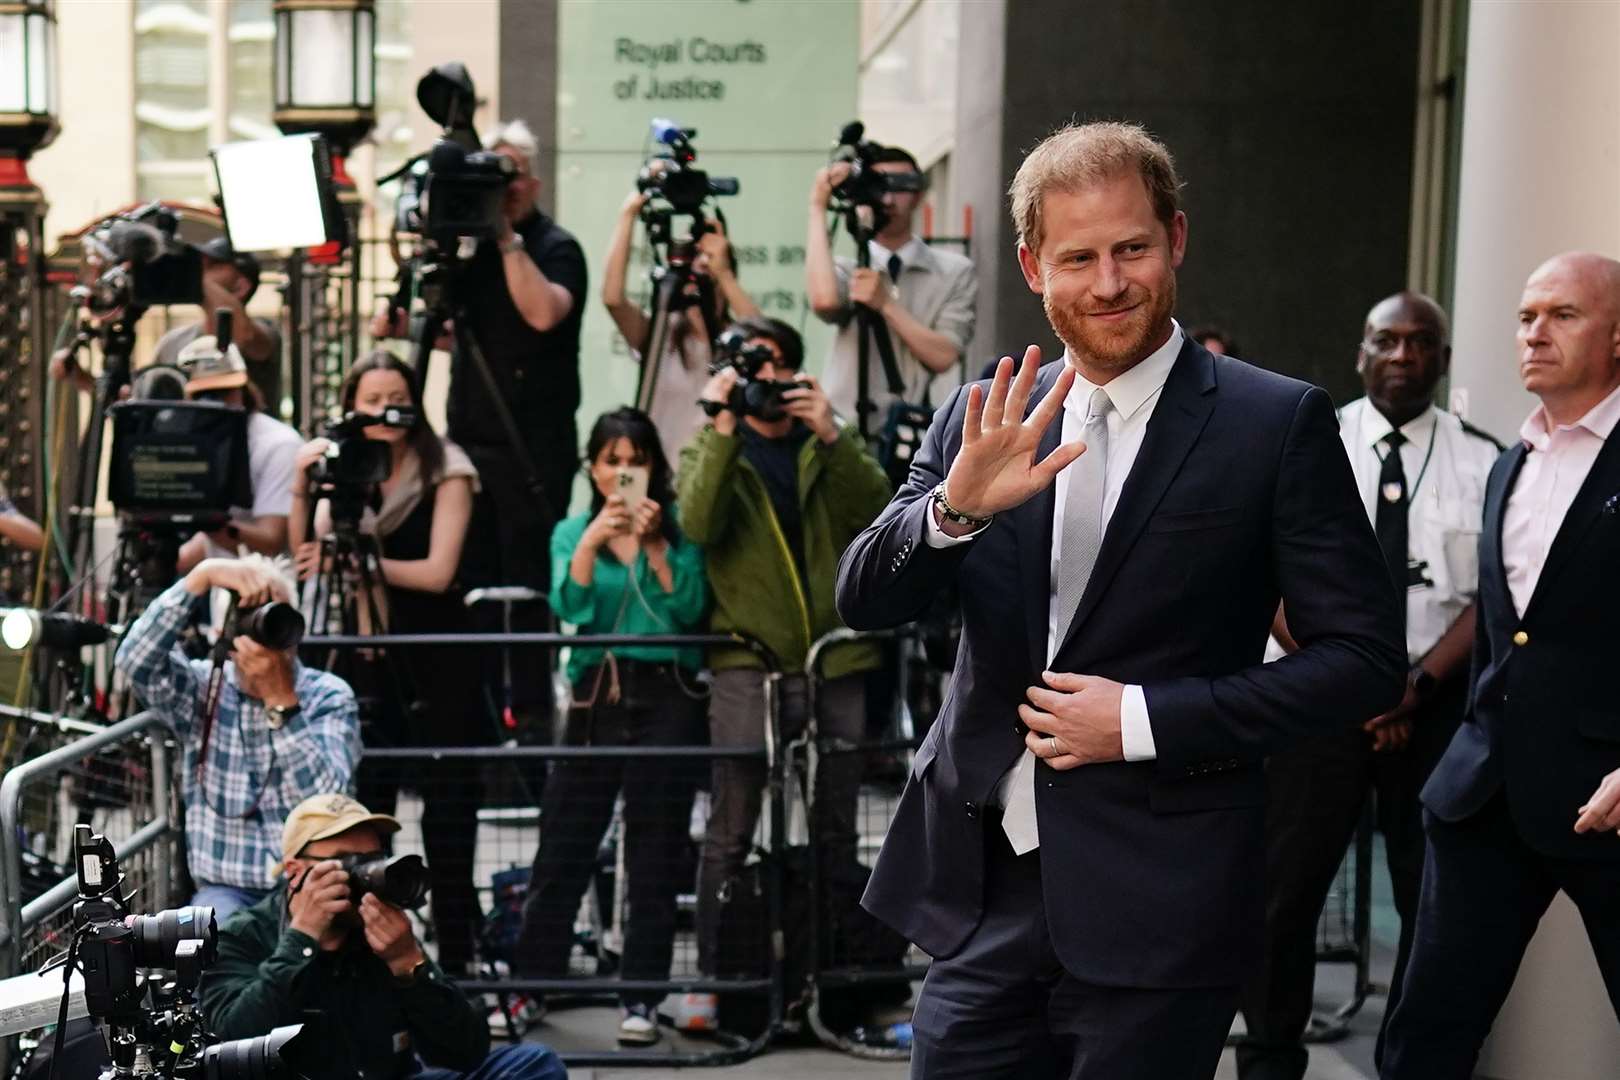 The Duke of Sussex leaving the Rolls Buildings in central London (Aaron Chown/PA)